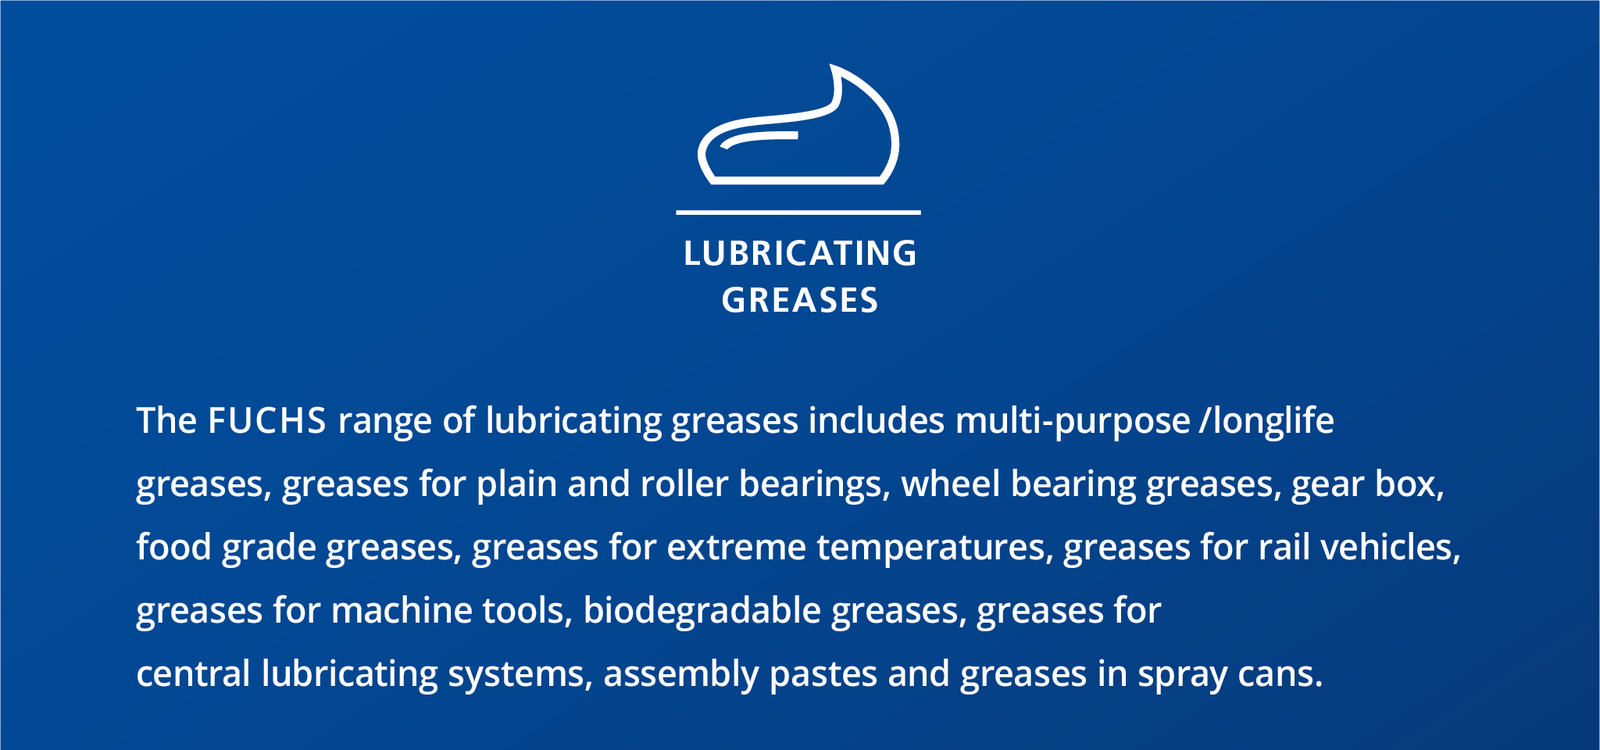 Blue information box explaining the lubricating greases sector of FUCHS.